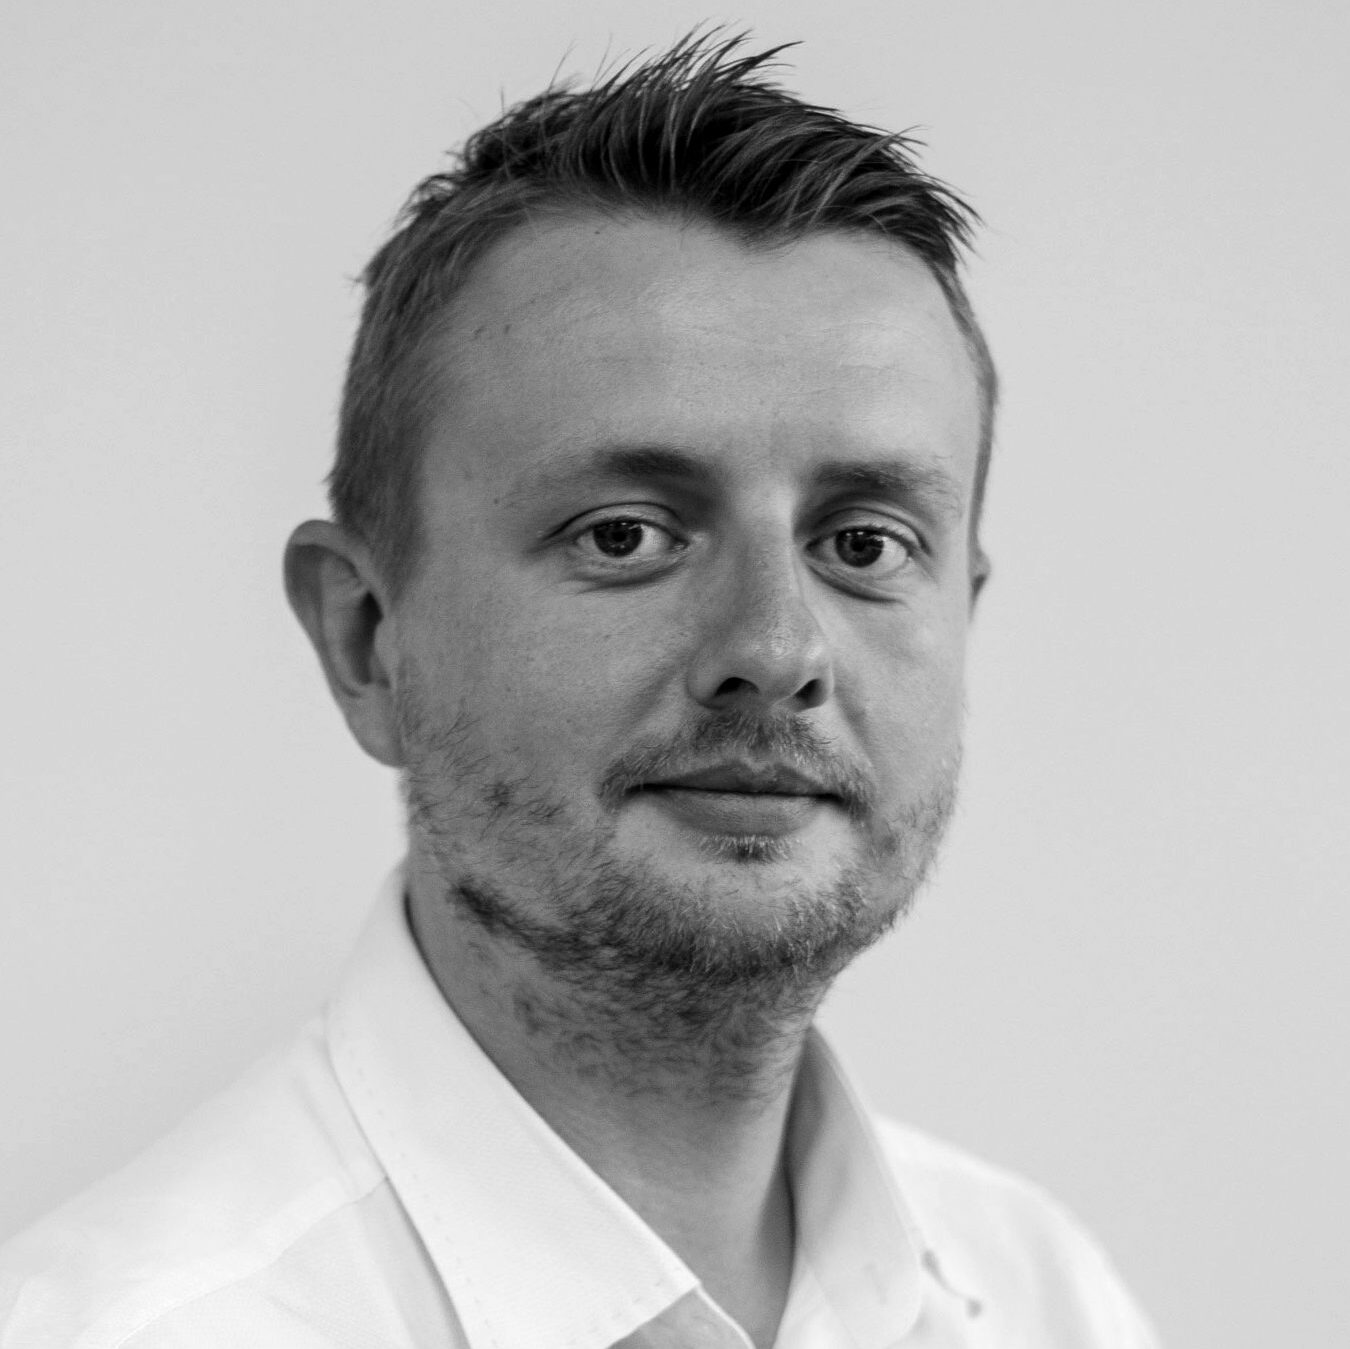 An image of Ralf who is Director of FutureLab